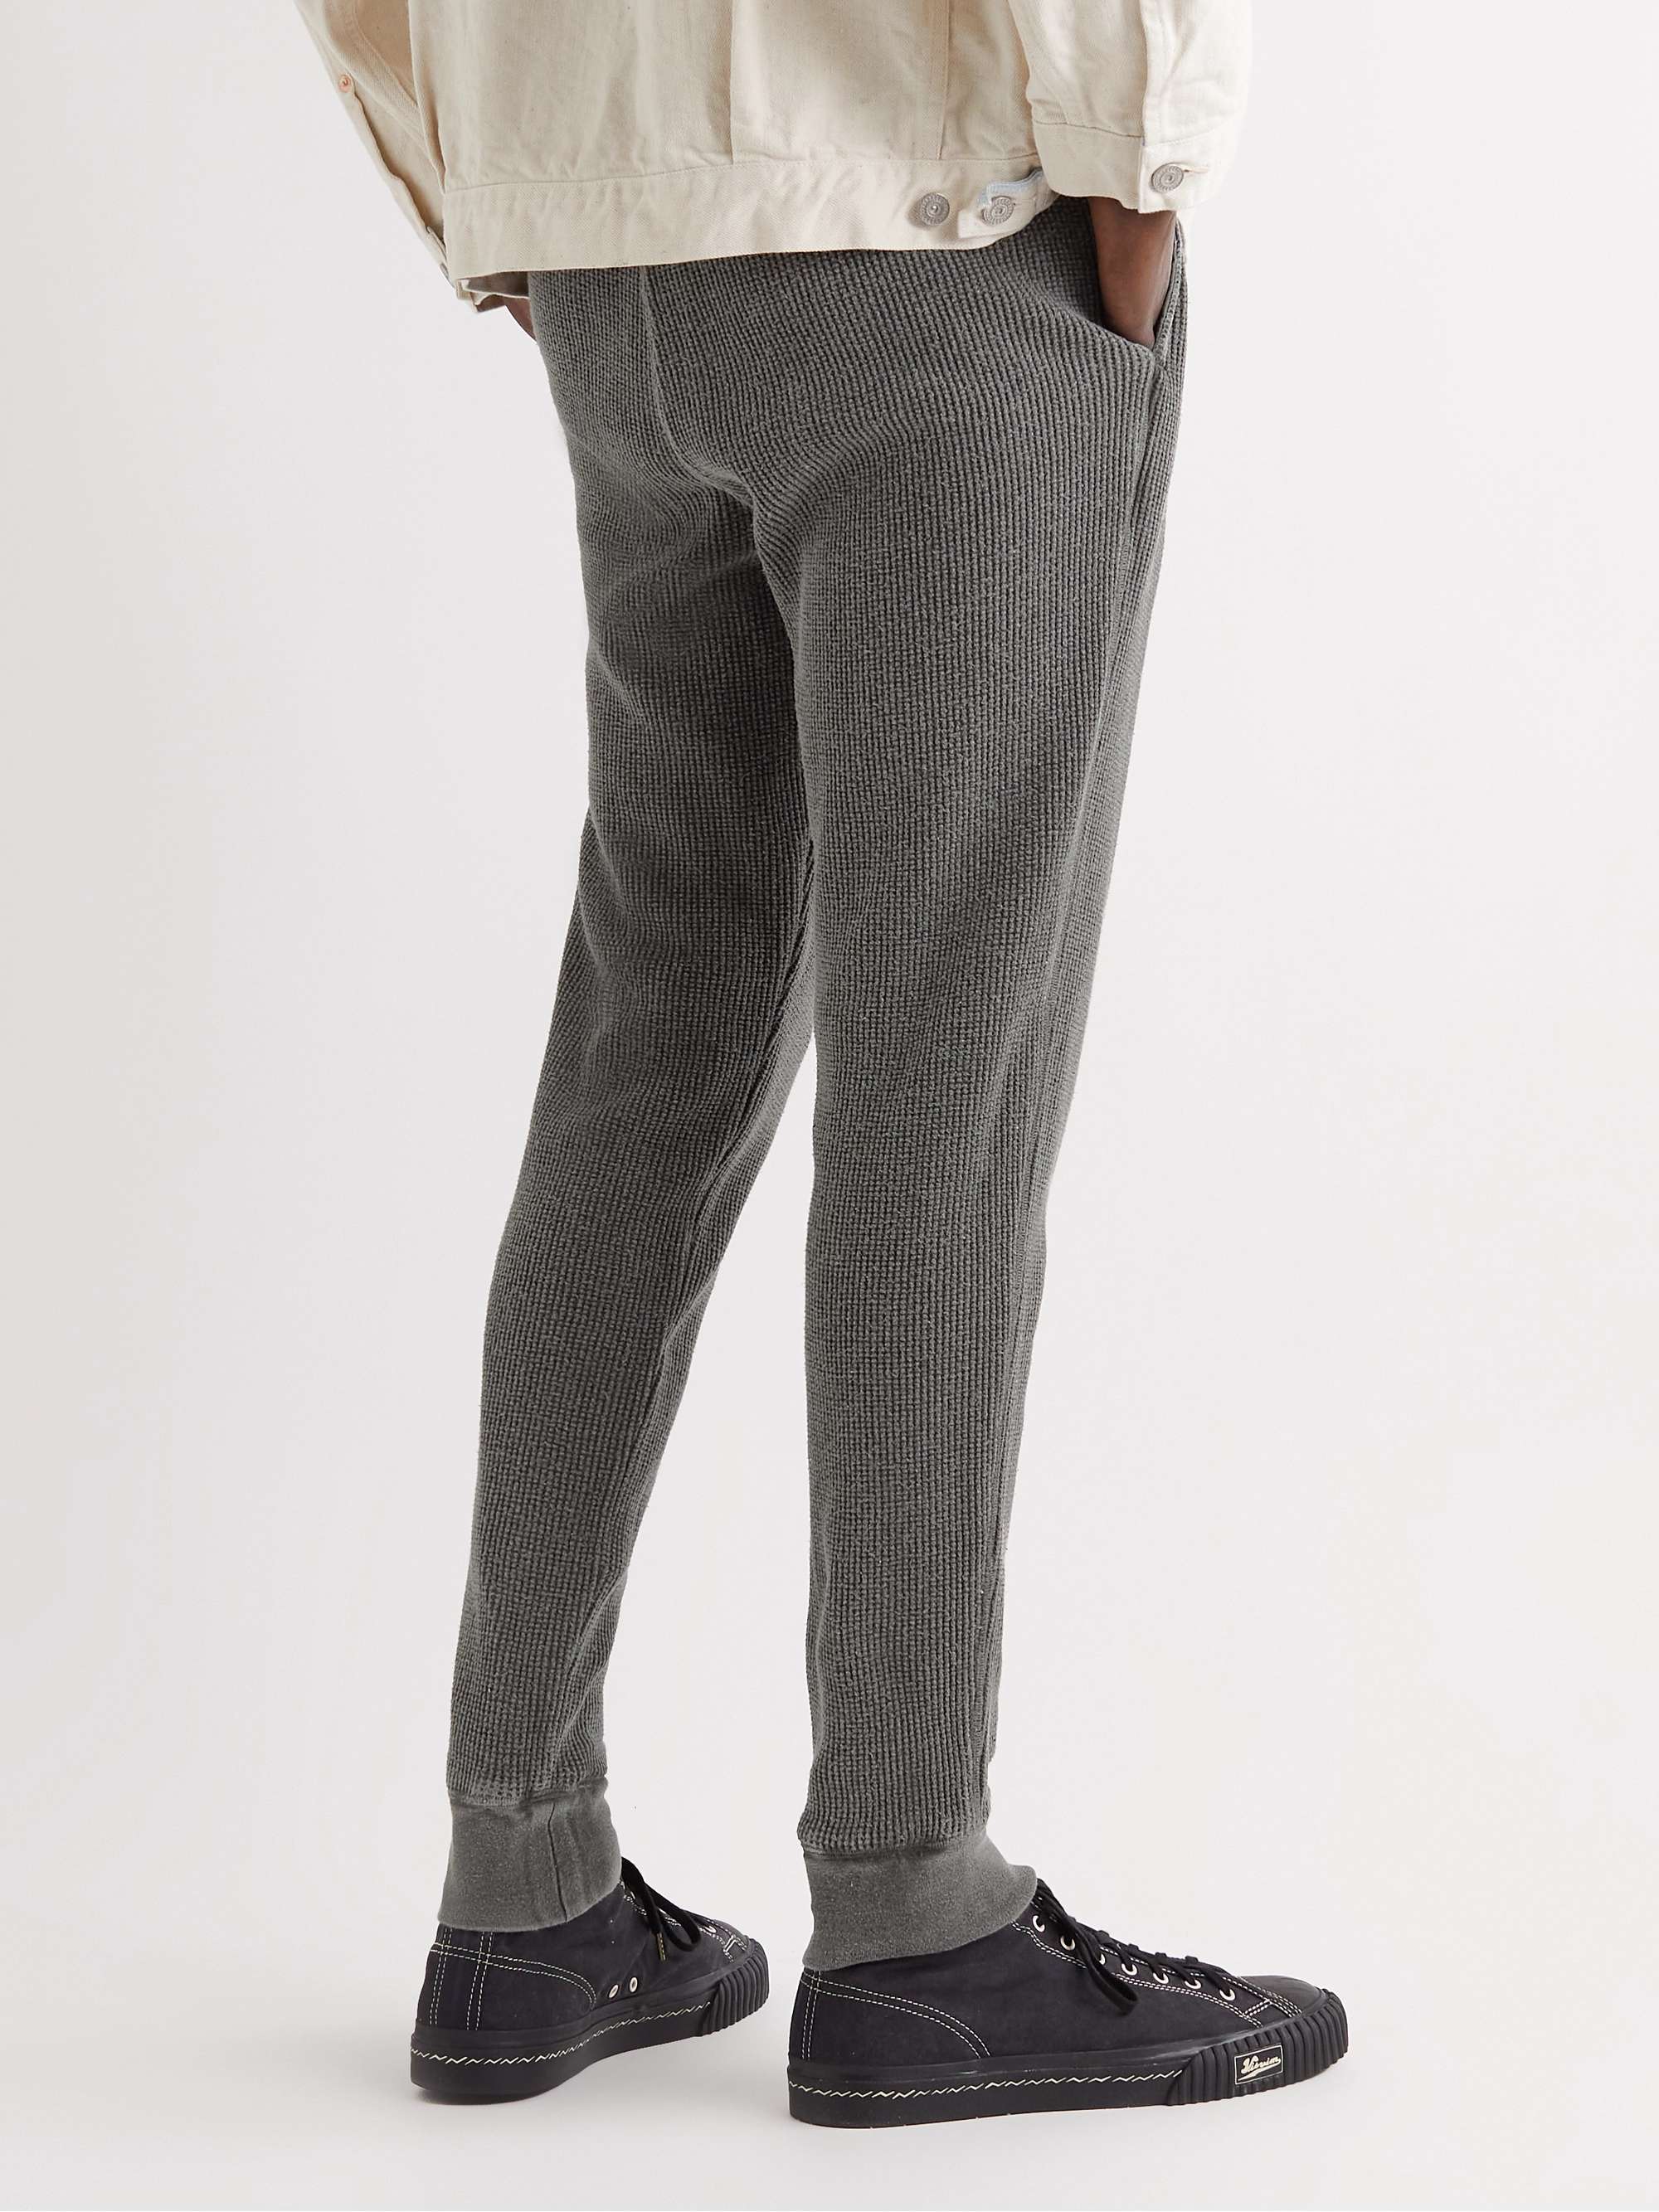 COTTLE Noel Slim-Fit Tapered Organic Cotton and Silk-Blend Drawstring Sweatpants